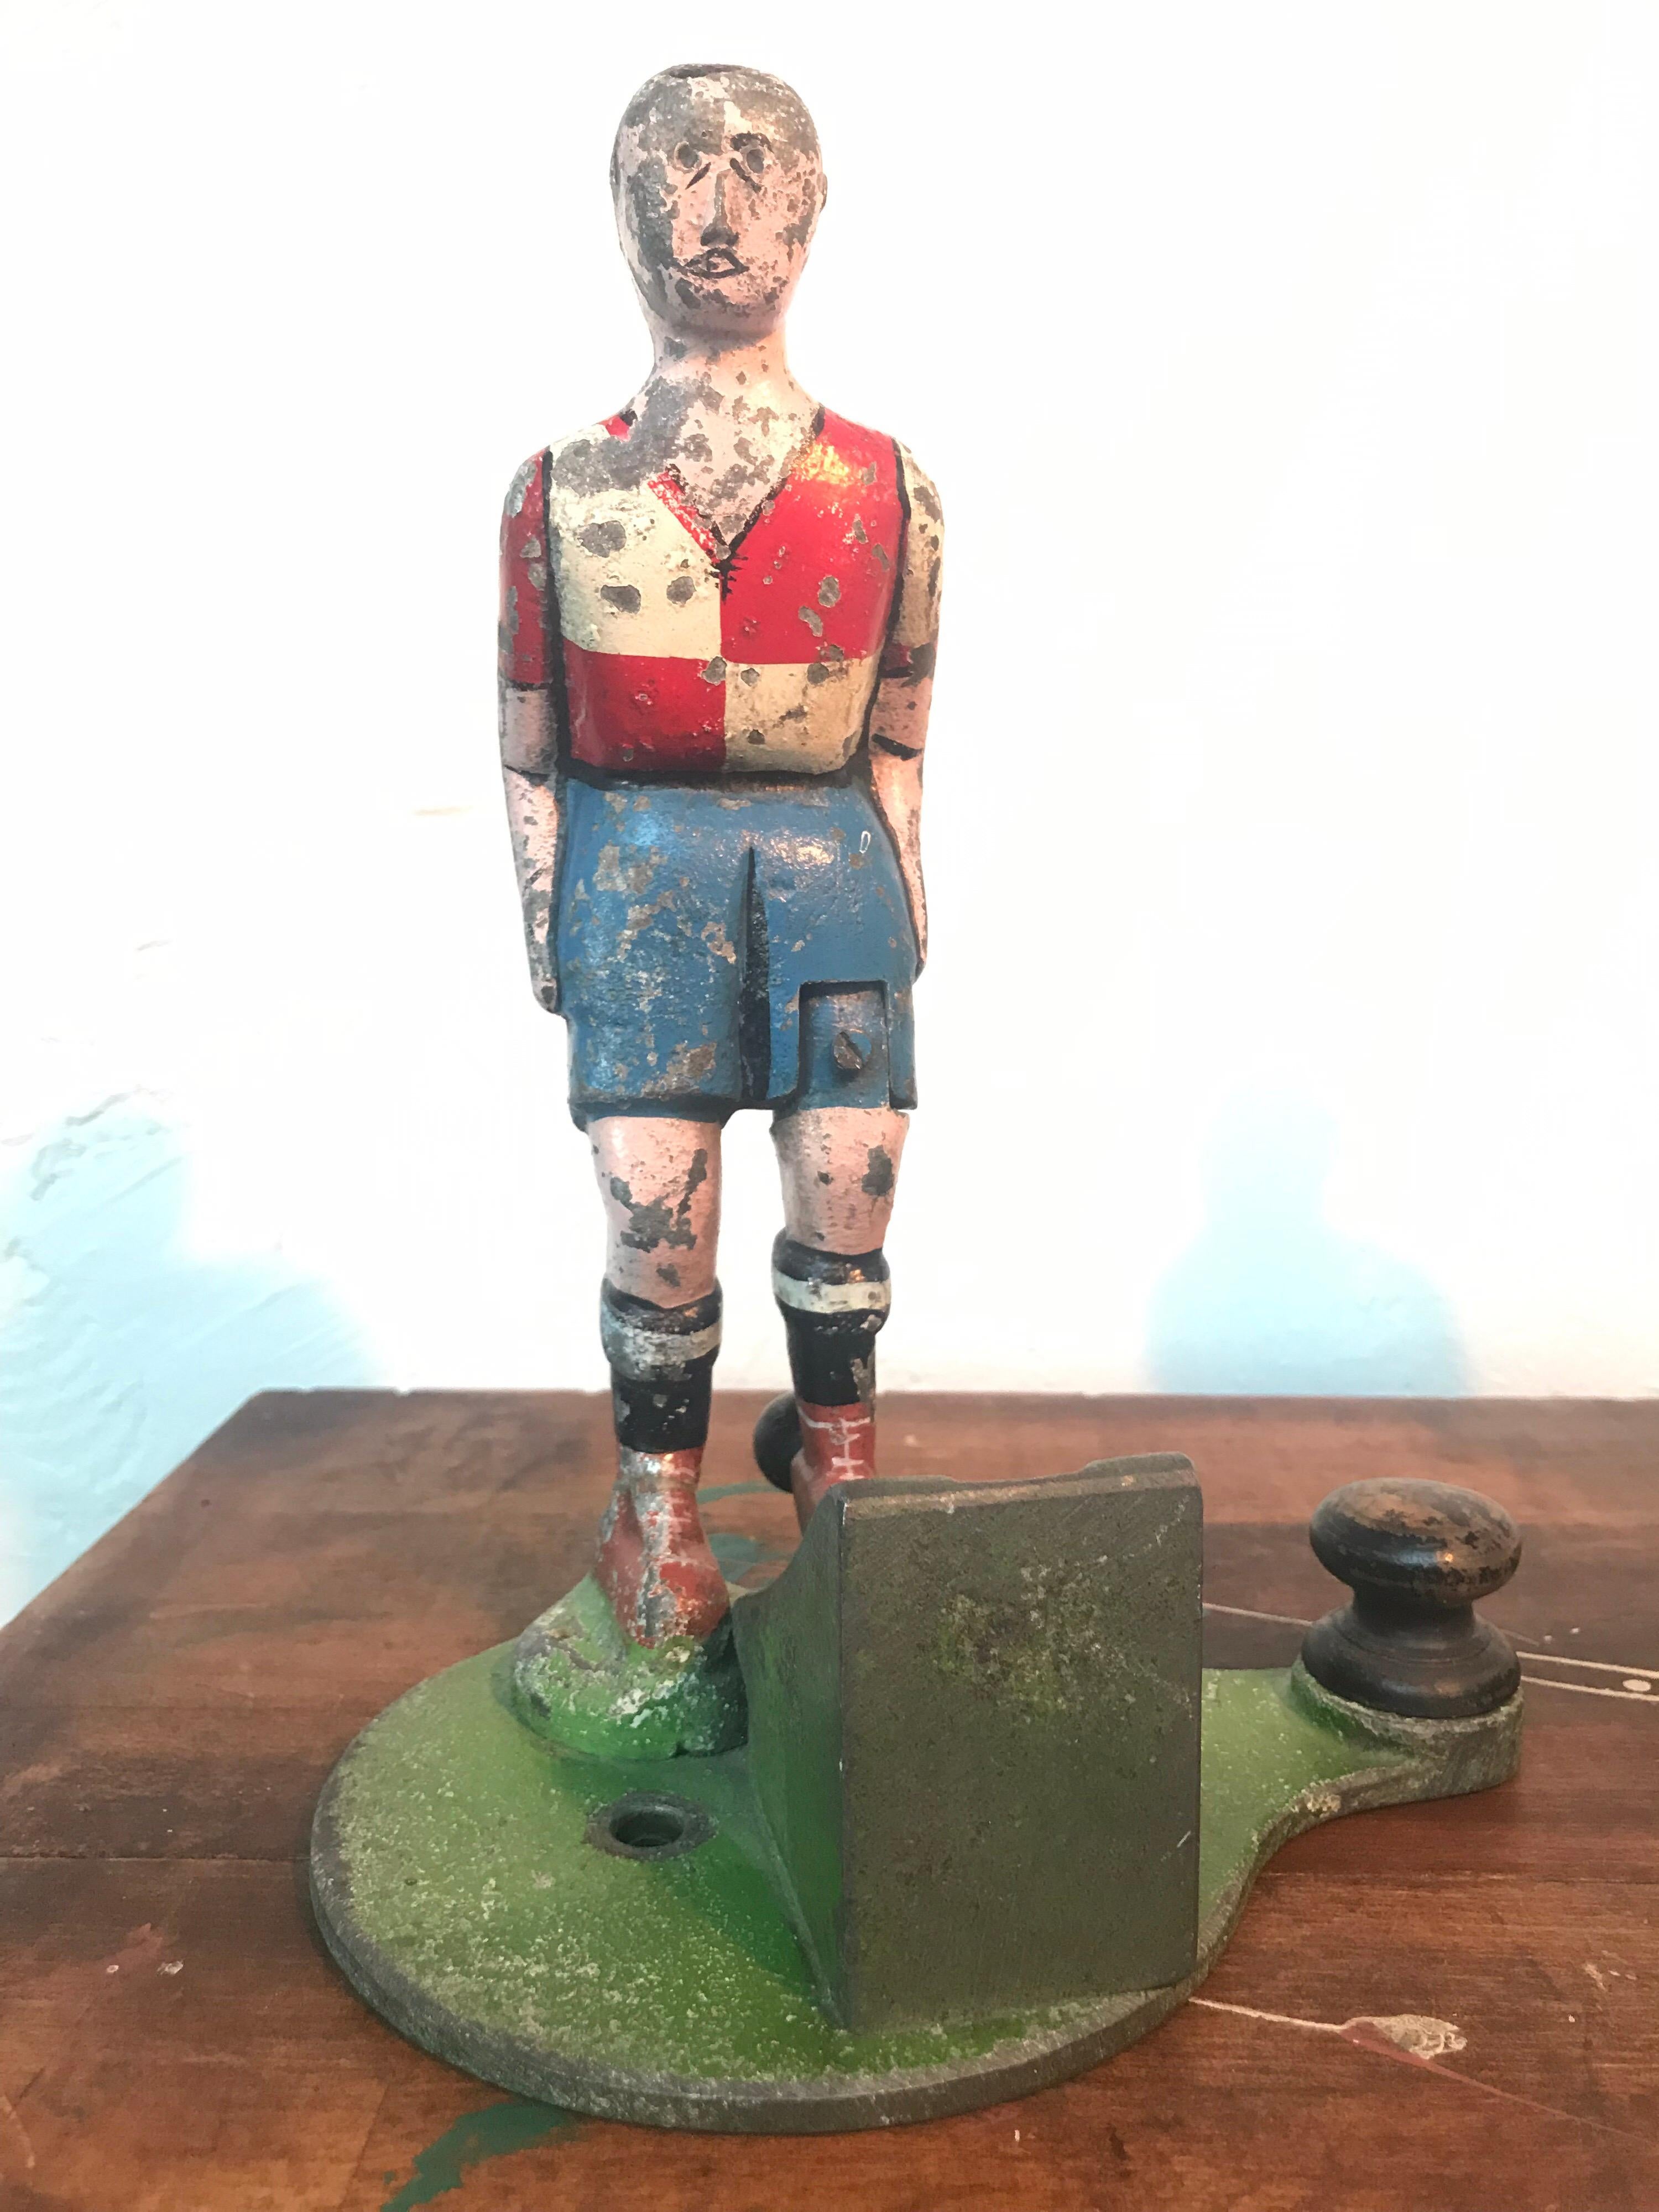 A pair of very decorative antique soccer players from a fun fair carnival game
Great patina and still in working condition.